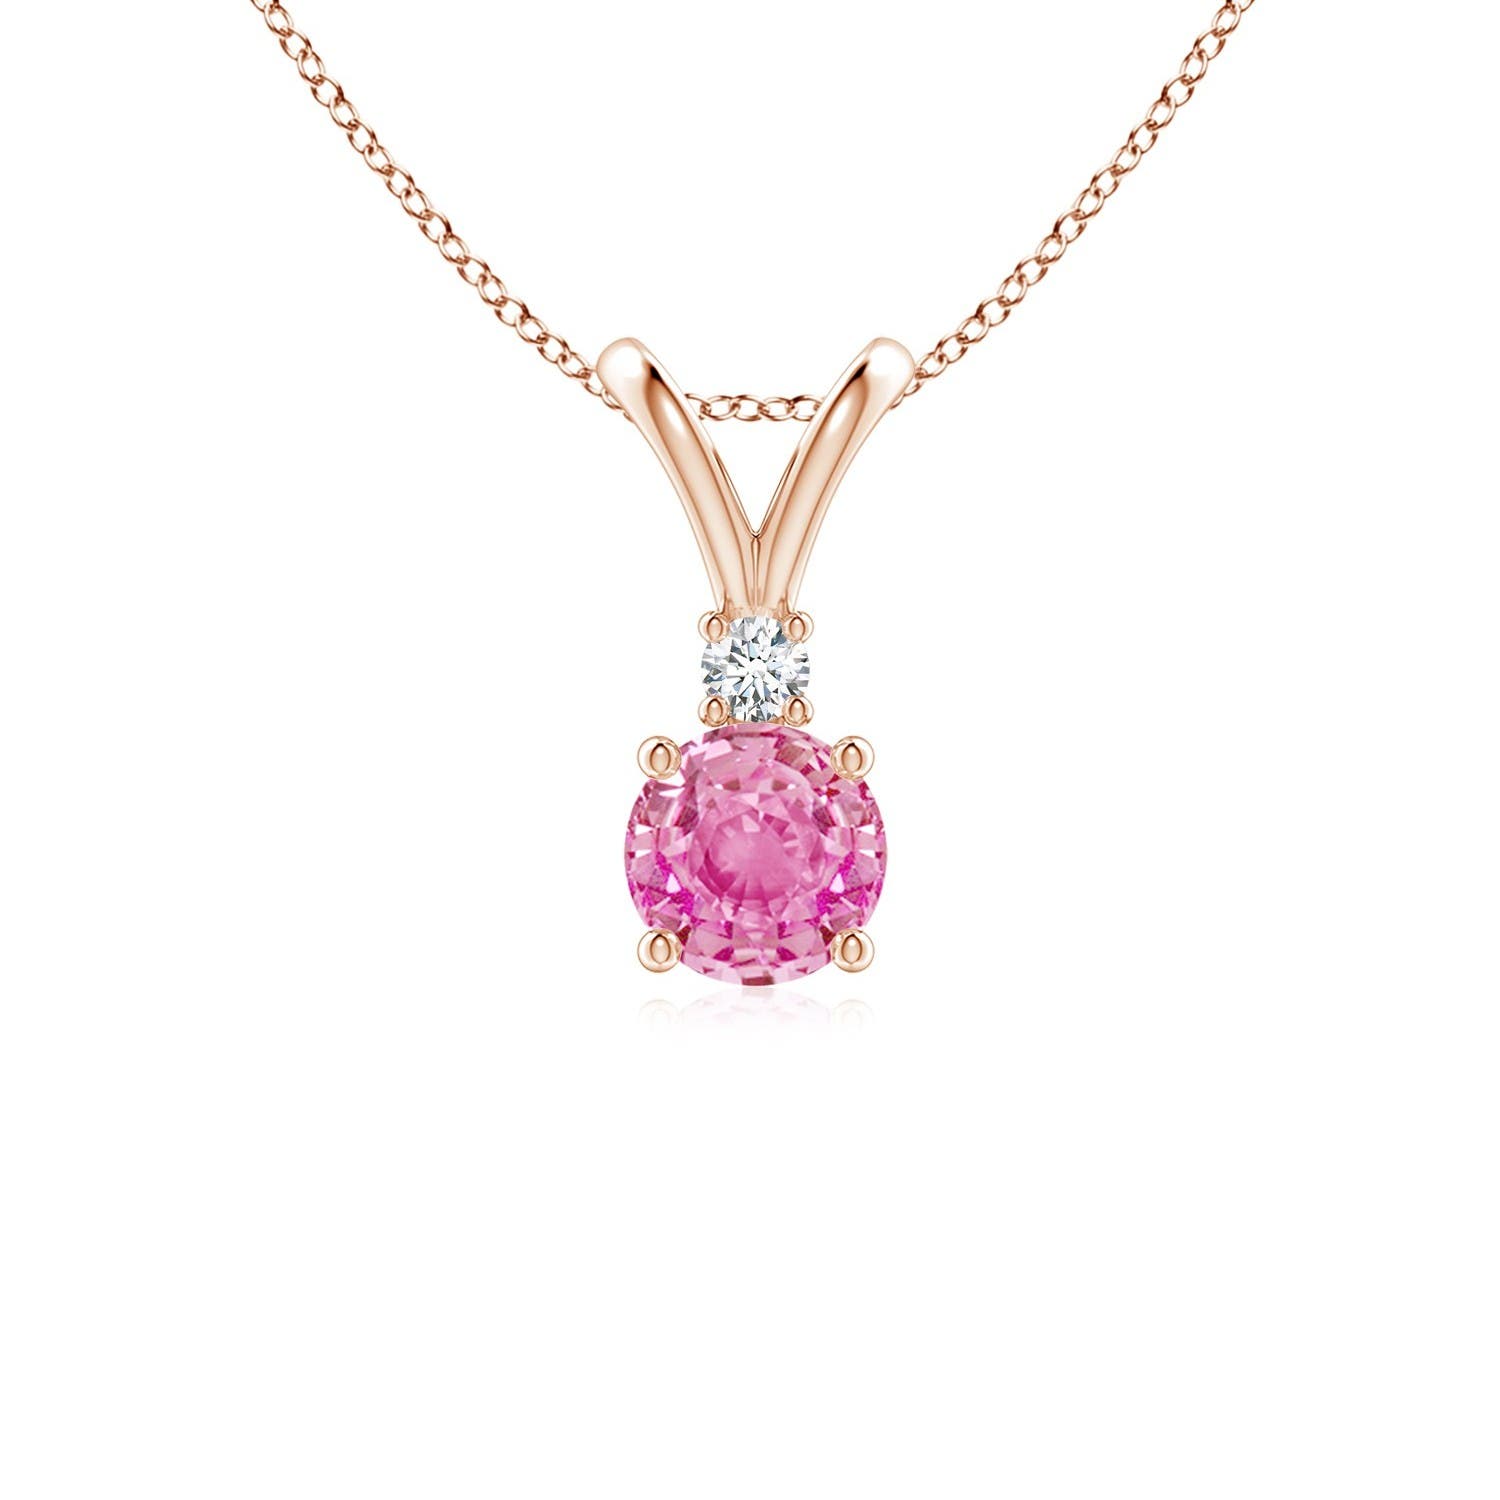 AA - Pink Sapphire / 0.63 CT / 14 KT Rose Gold